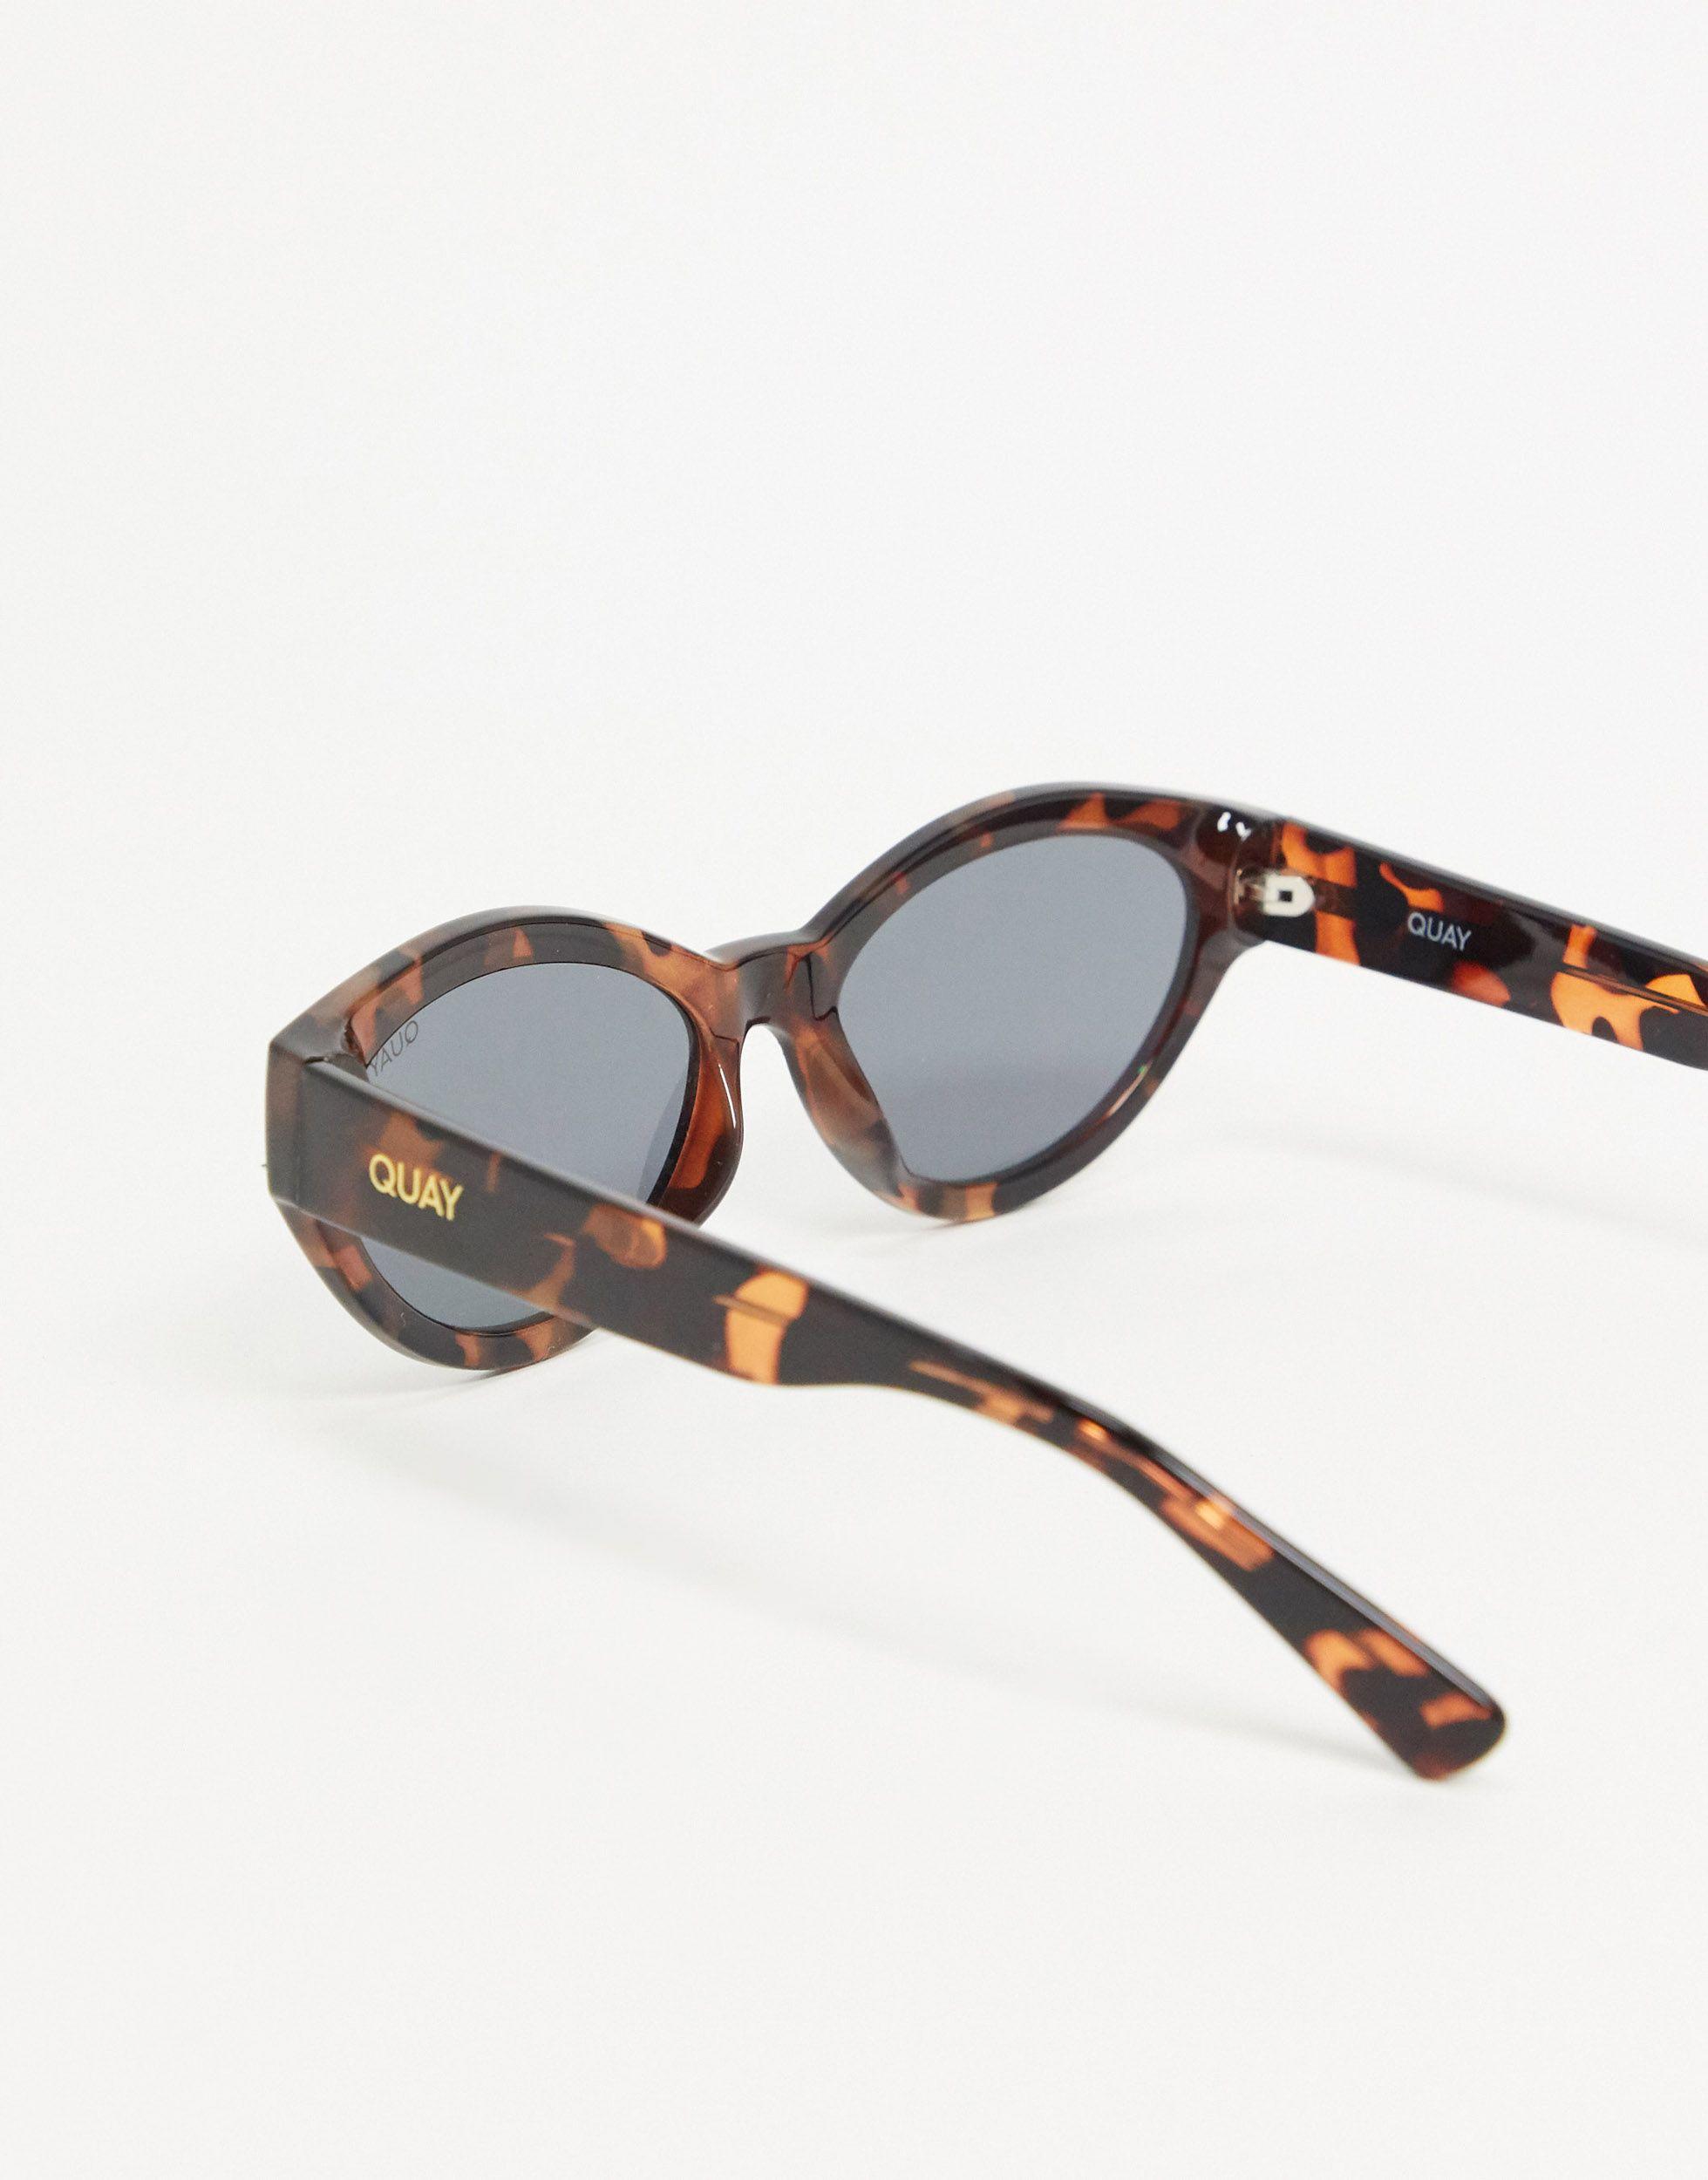 Quay Totally buggin Cat Eye Sunglasses in Brown | Lyst